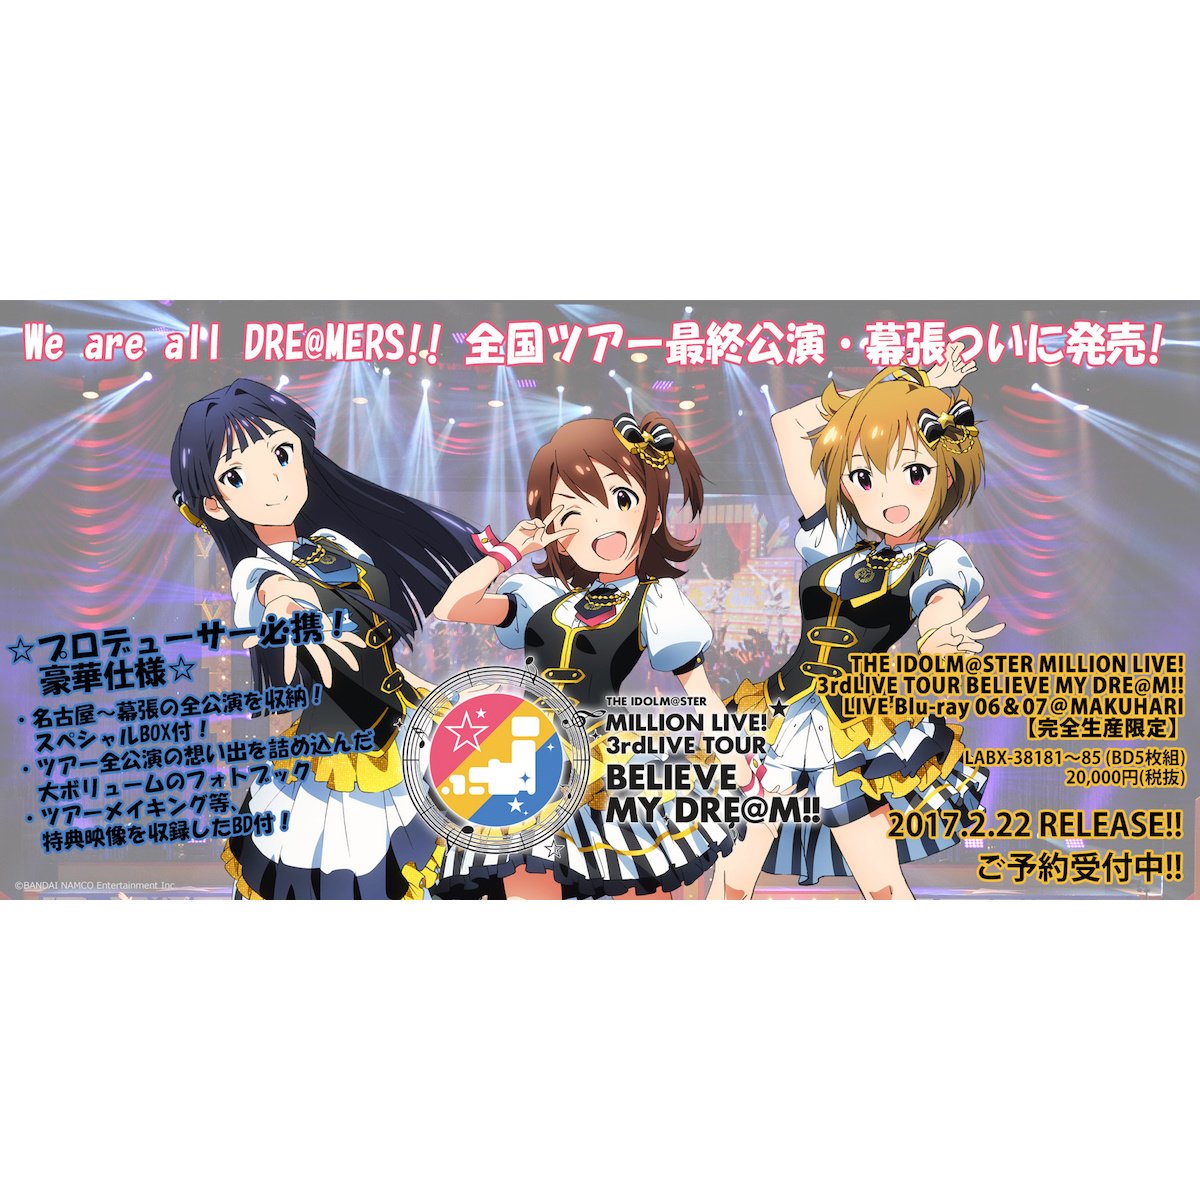 Amazing THE IDOLM@STER: Million Live! Pictures & Backgrounds